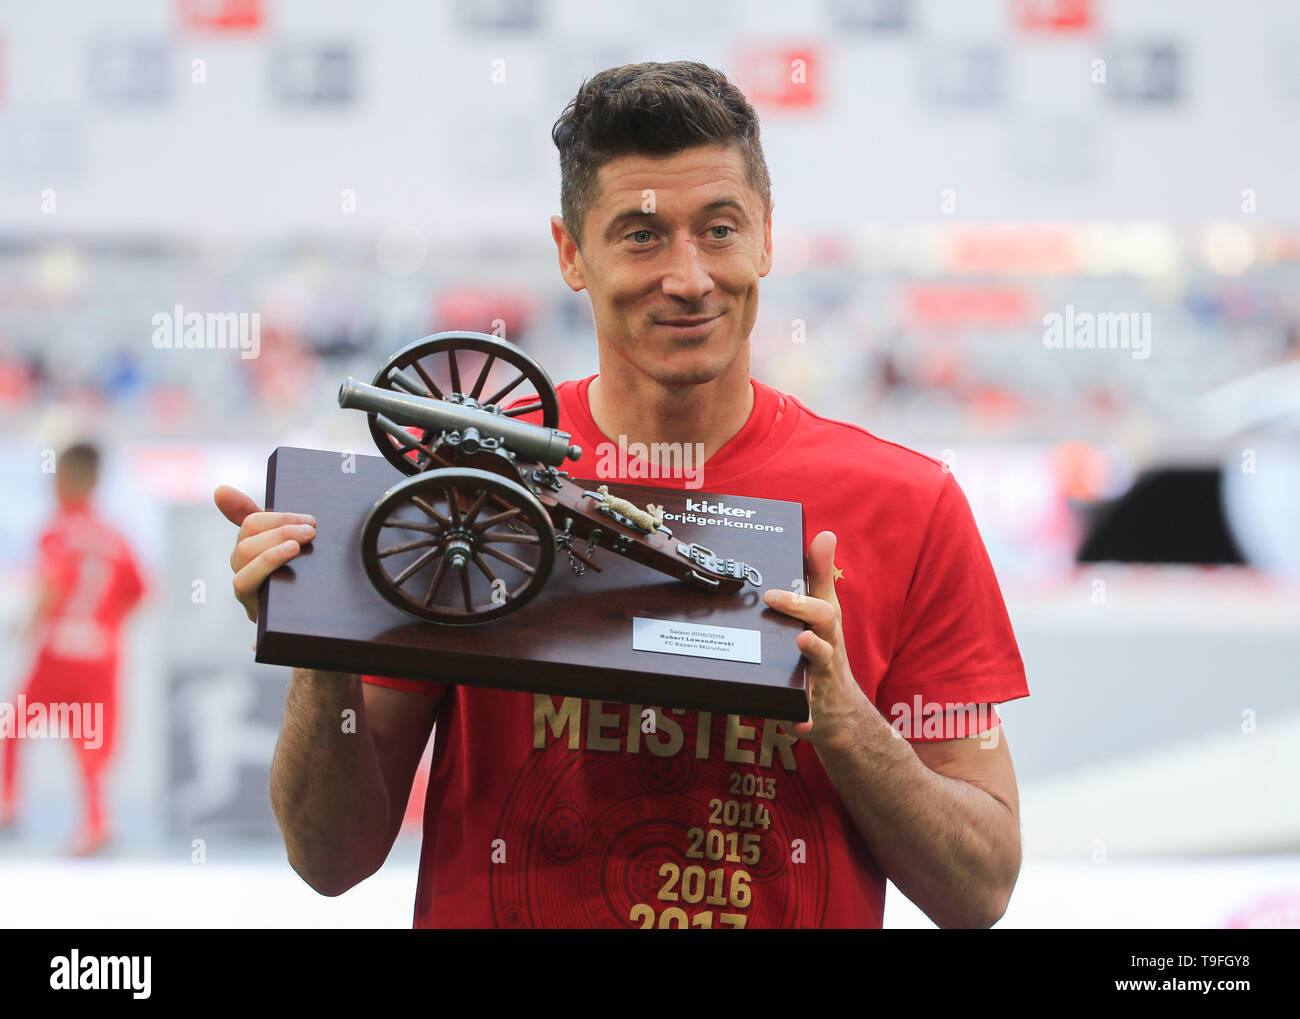 Munich, Germany. 18th May, 2019. Bayern Munich's Lewandowski poses with the for the top goal scorer during the awarding ceremony after a German Bundesliga match FC Bayern Munich and